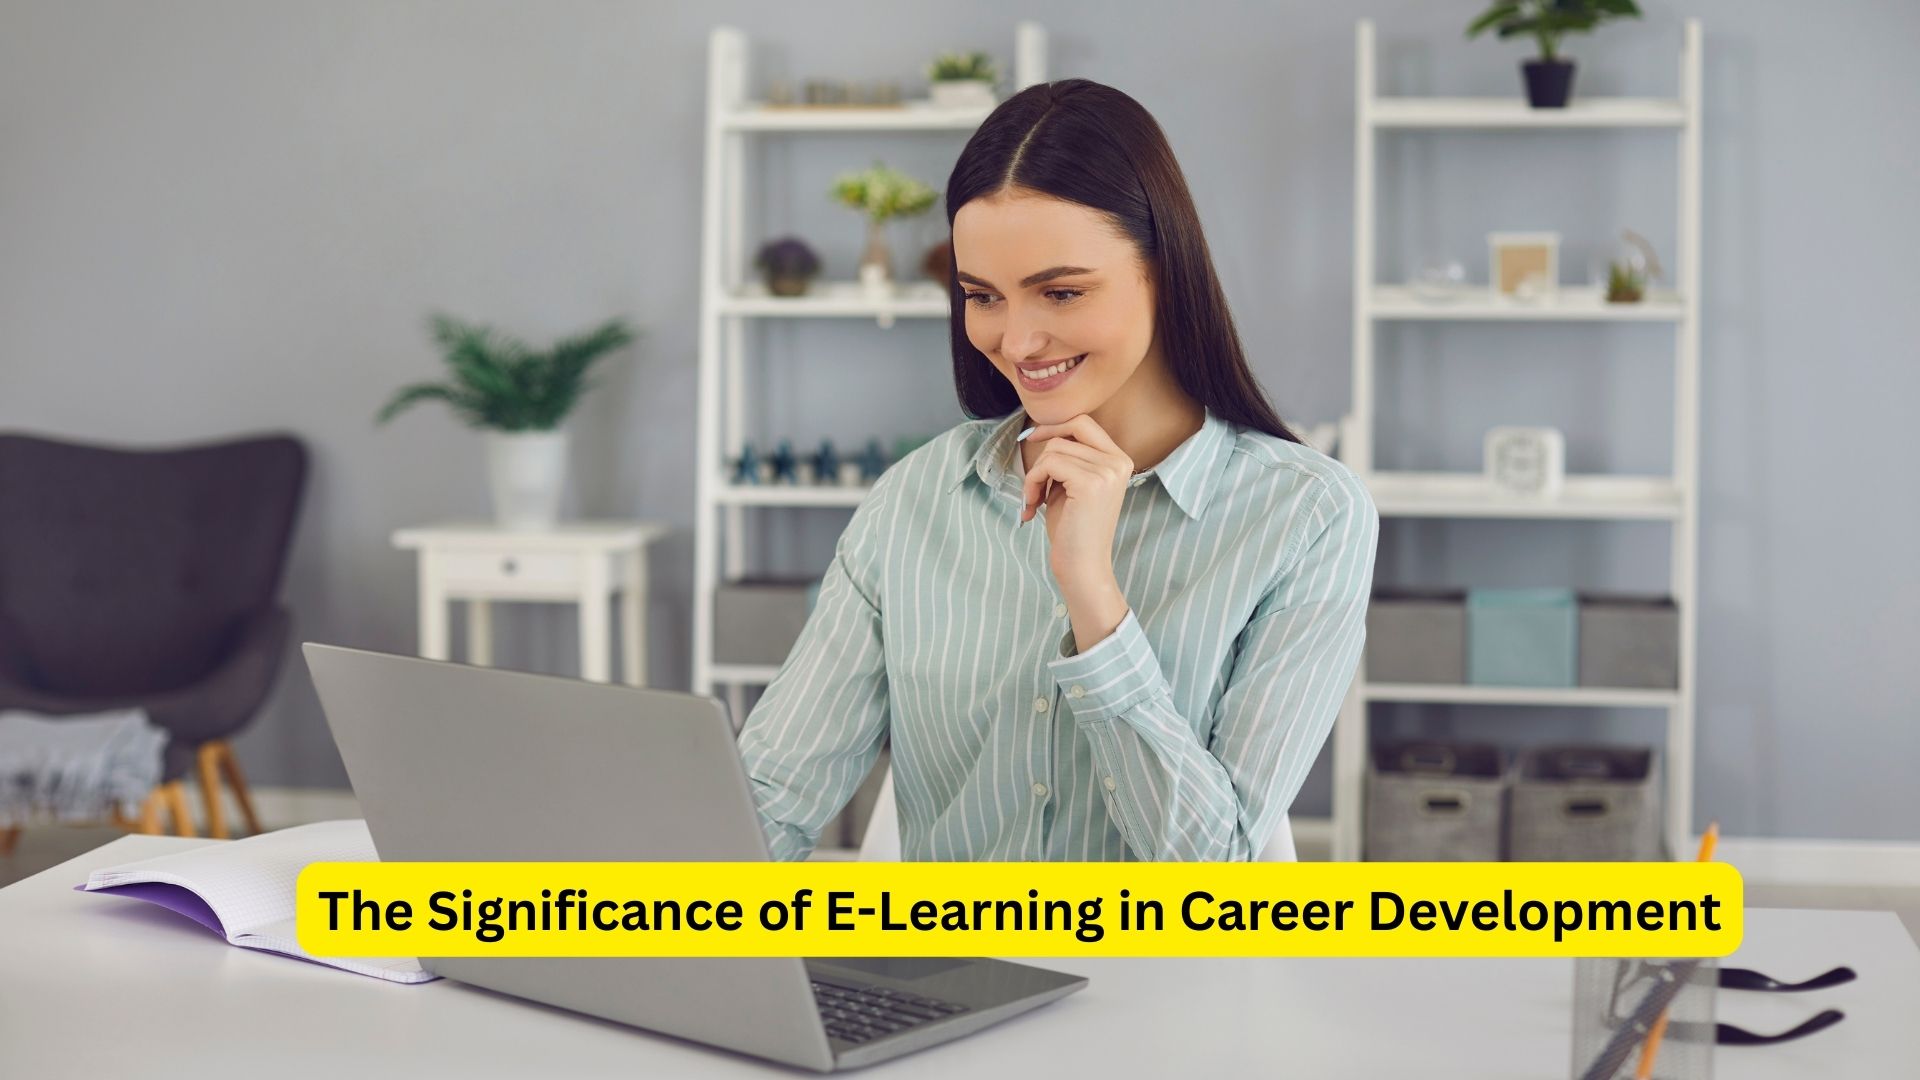 The Significance of E-Learning in Career Development